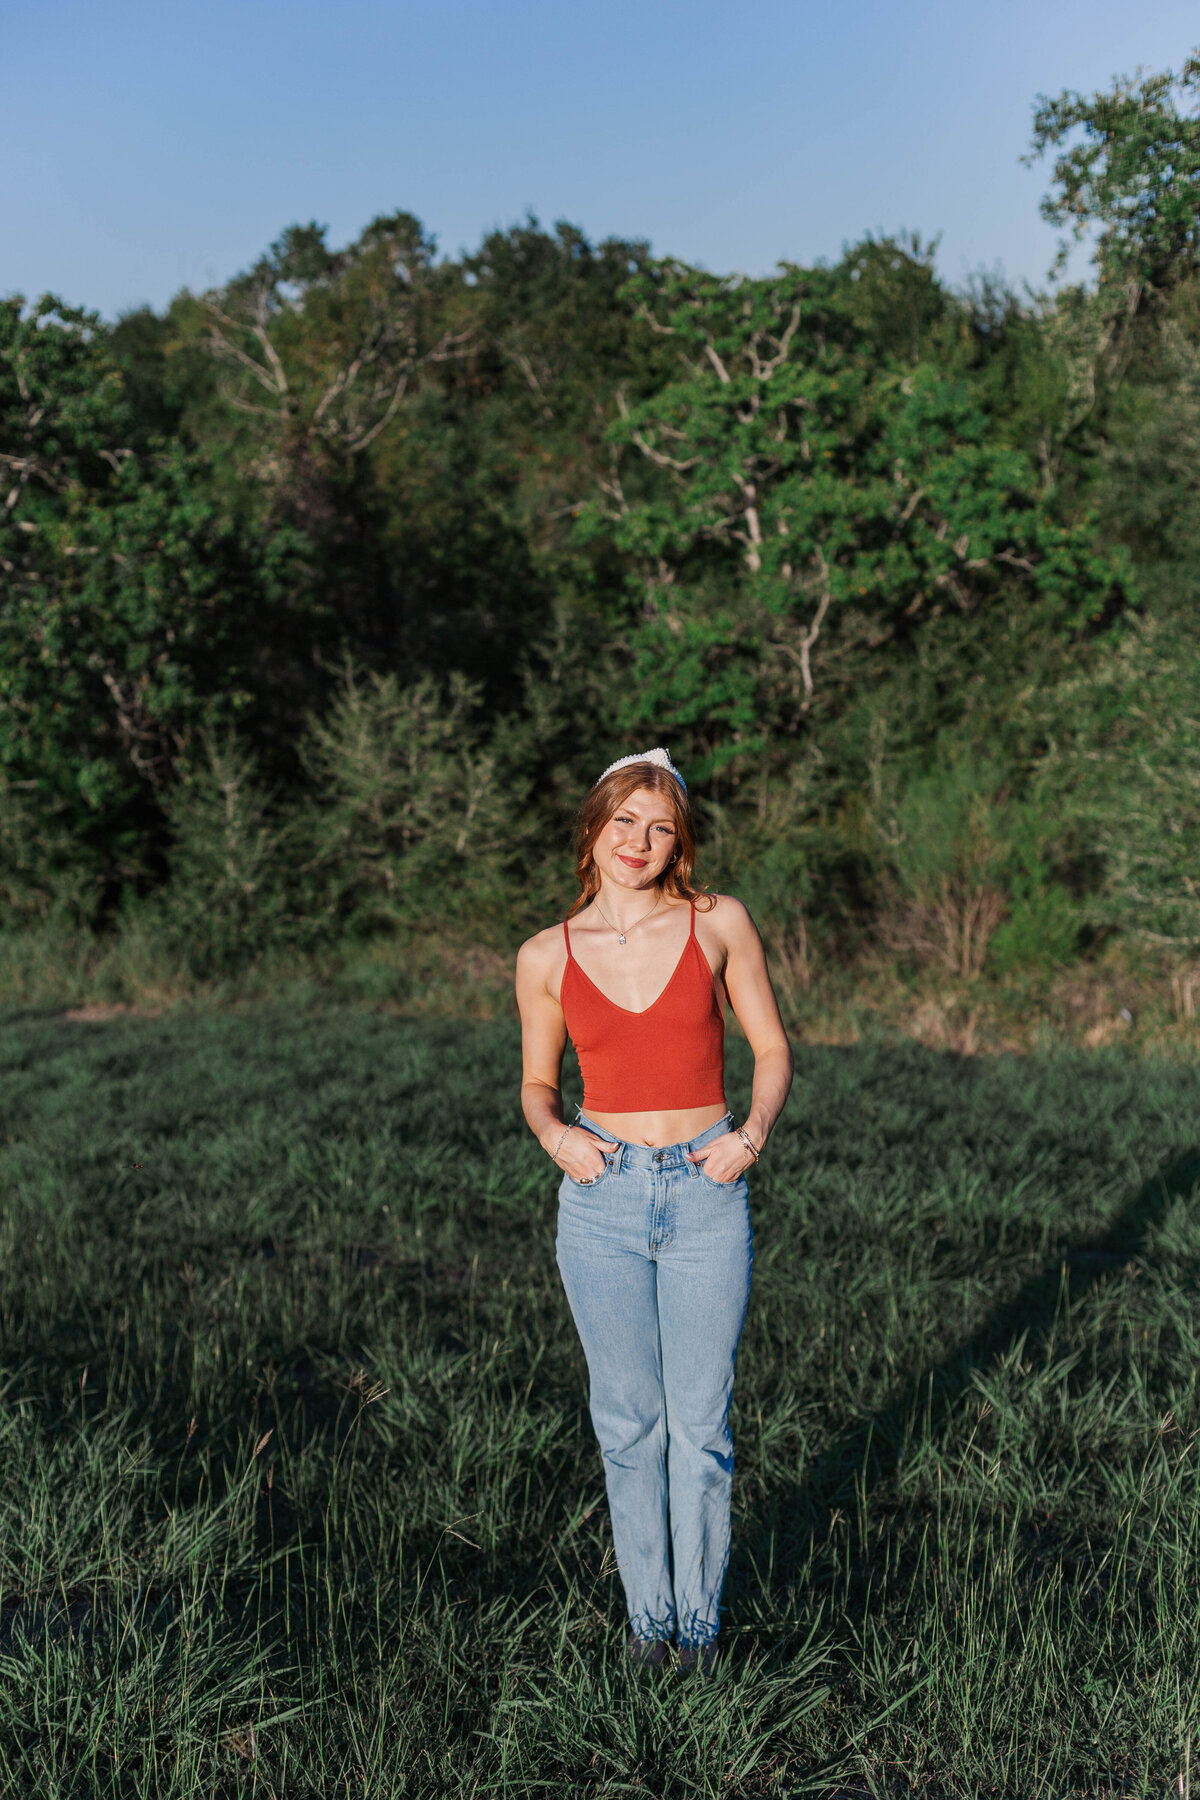 Santa Fe High School senior girl stands in a field wearing a red tank top and jeans